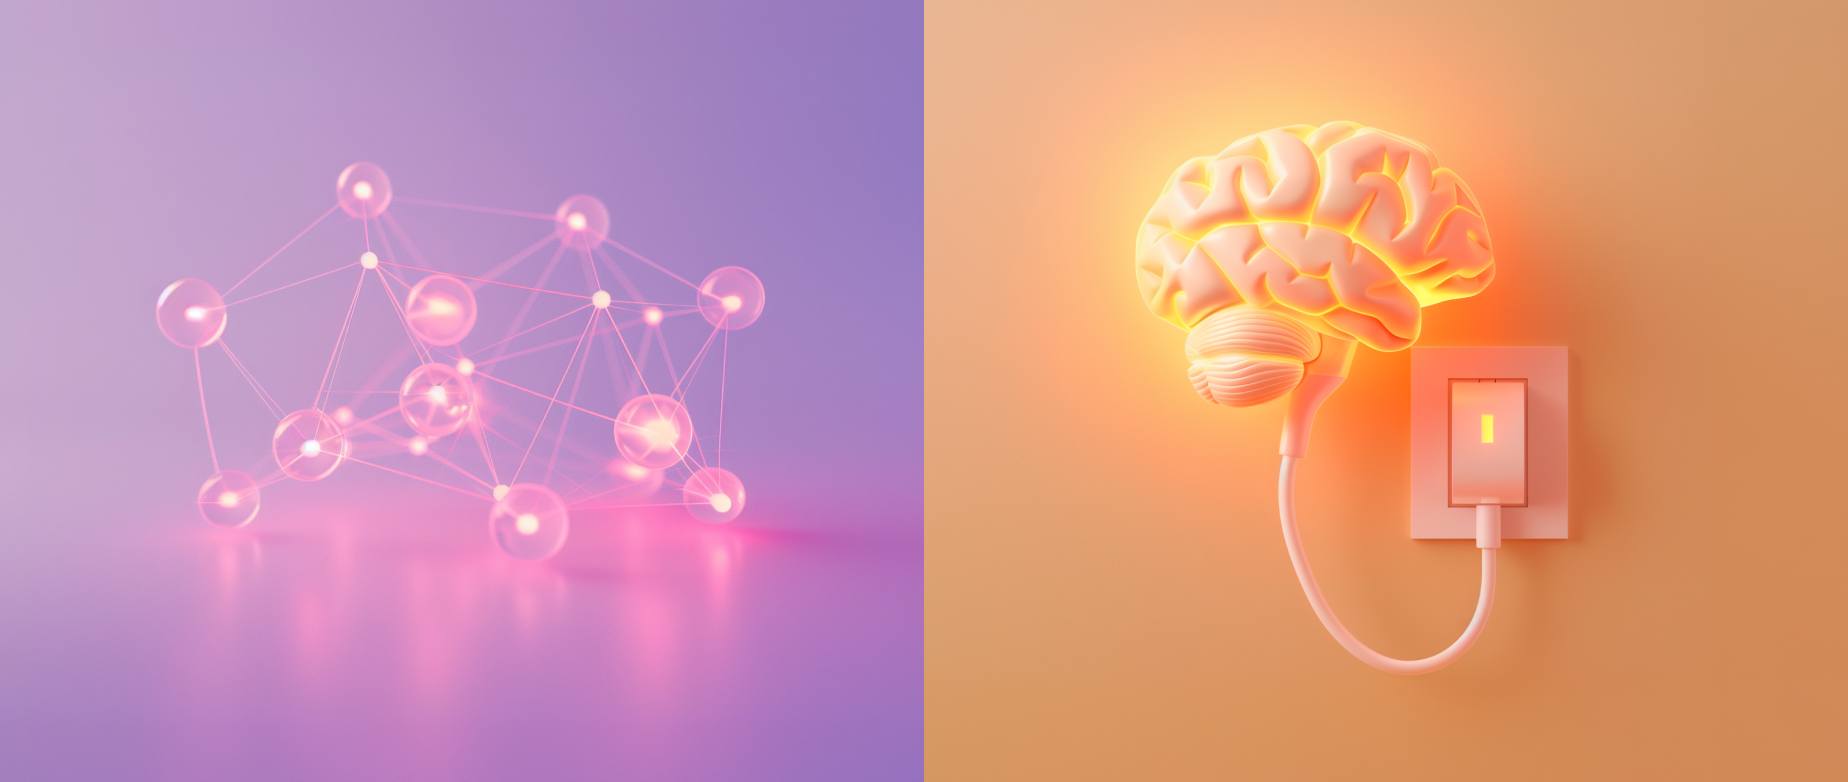 Image of a molecule on a purple background next to a brain plugged in on an orange background.